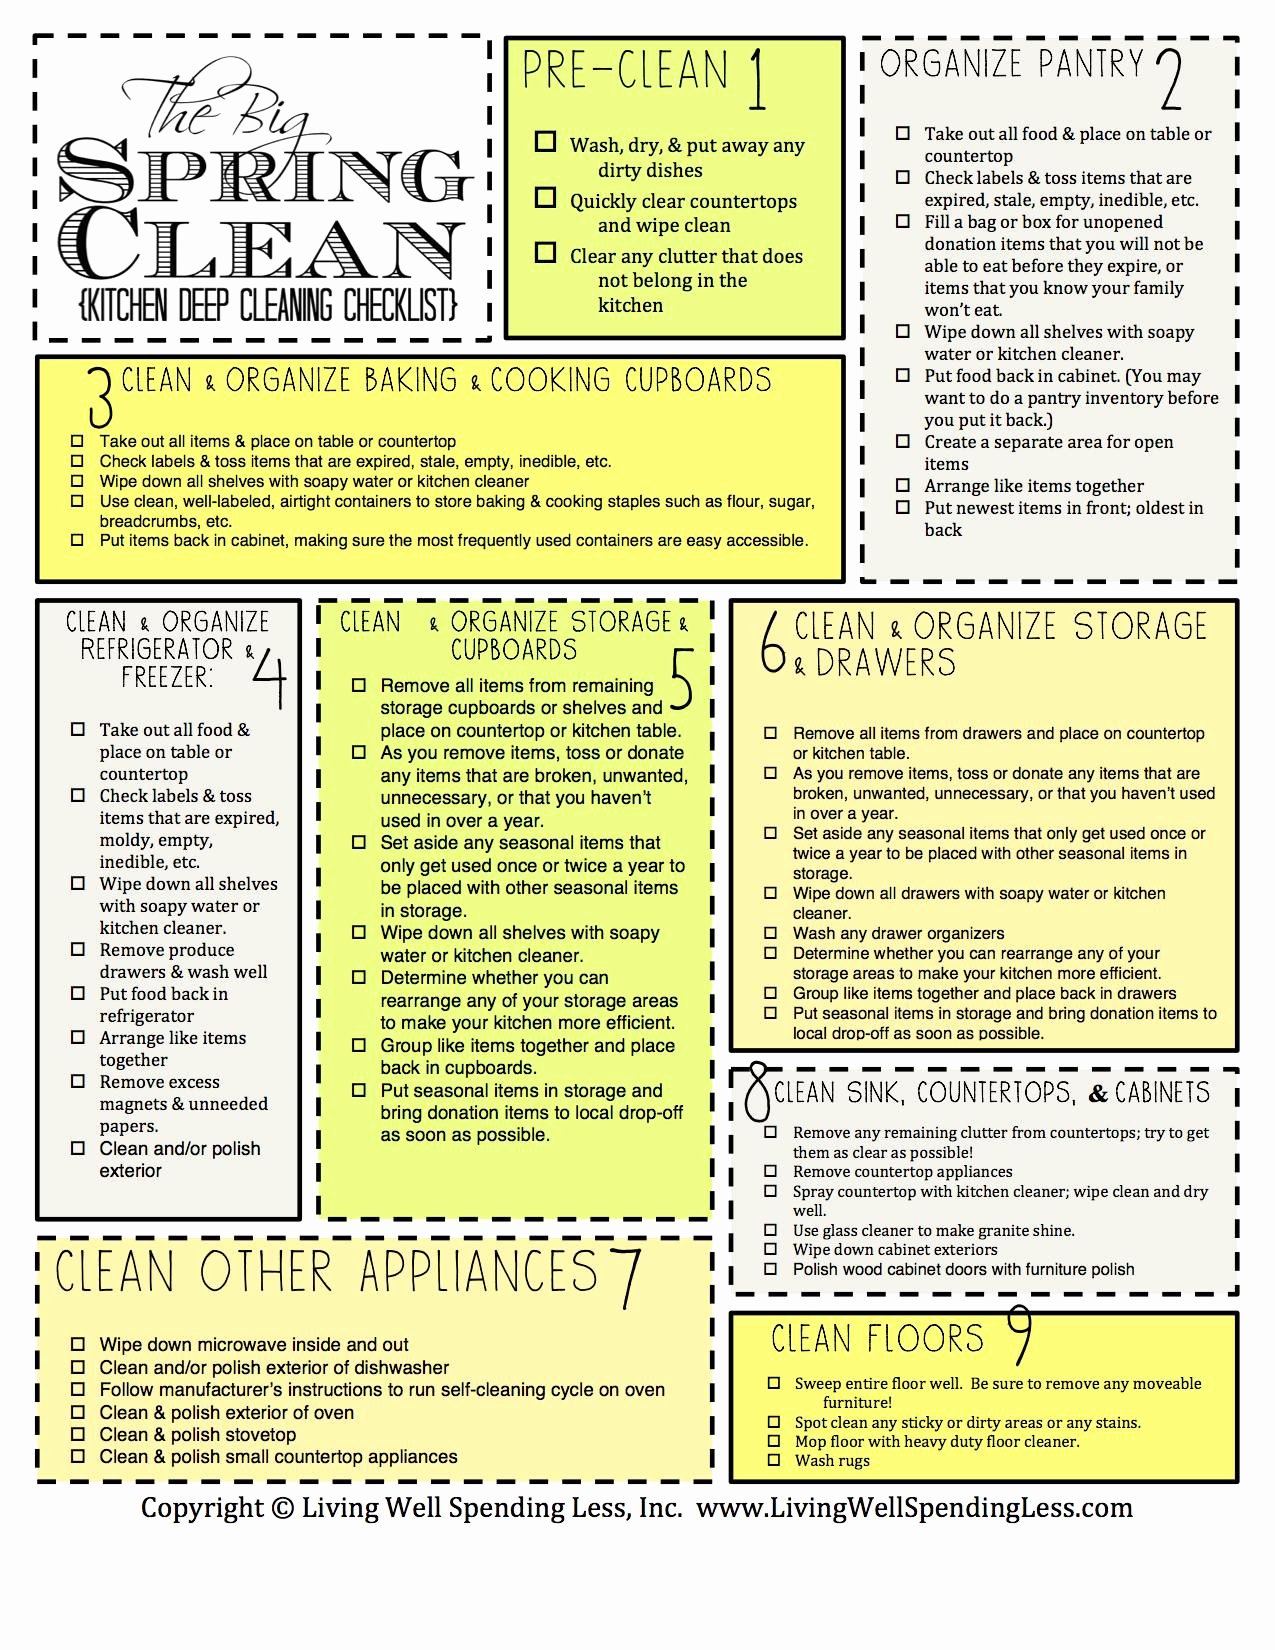 Deep Cleaning Checklist Template Best Of Kitchen Deep Cleaning Checklist Living Well Spending Less